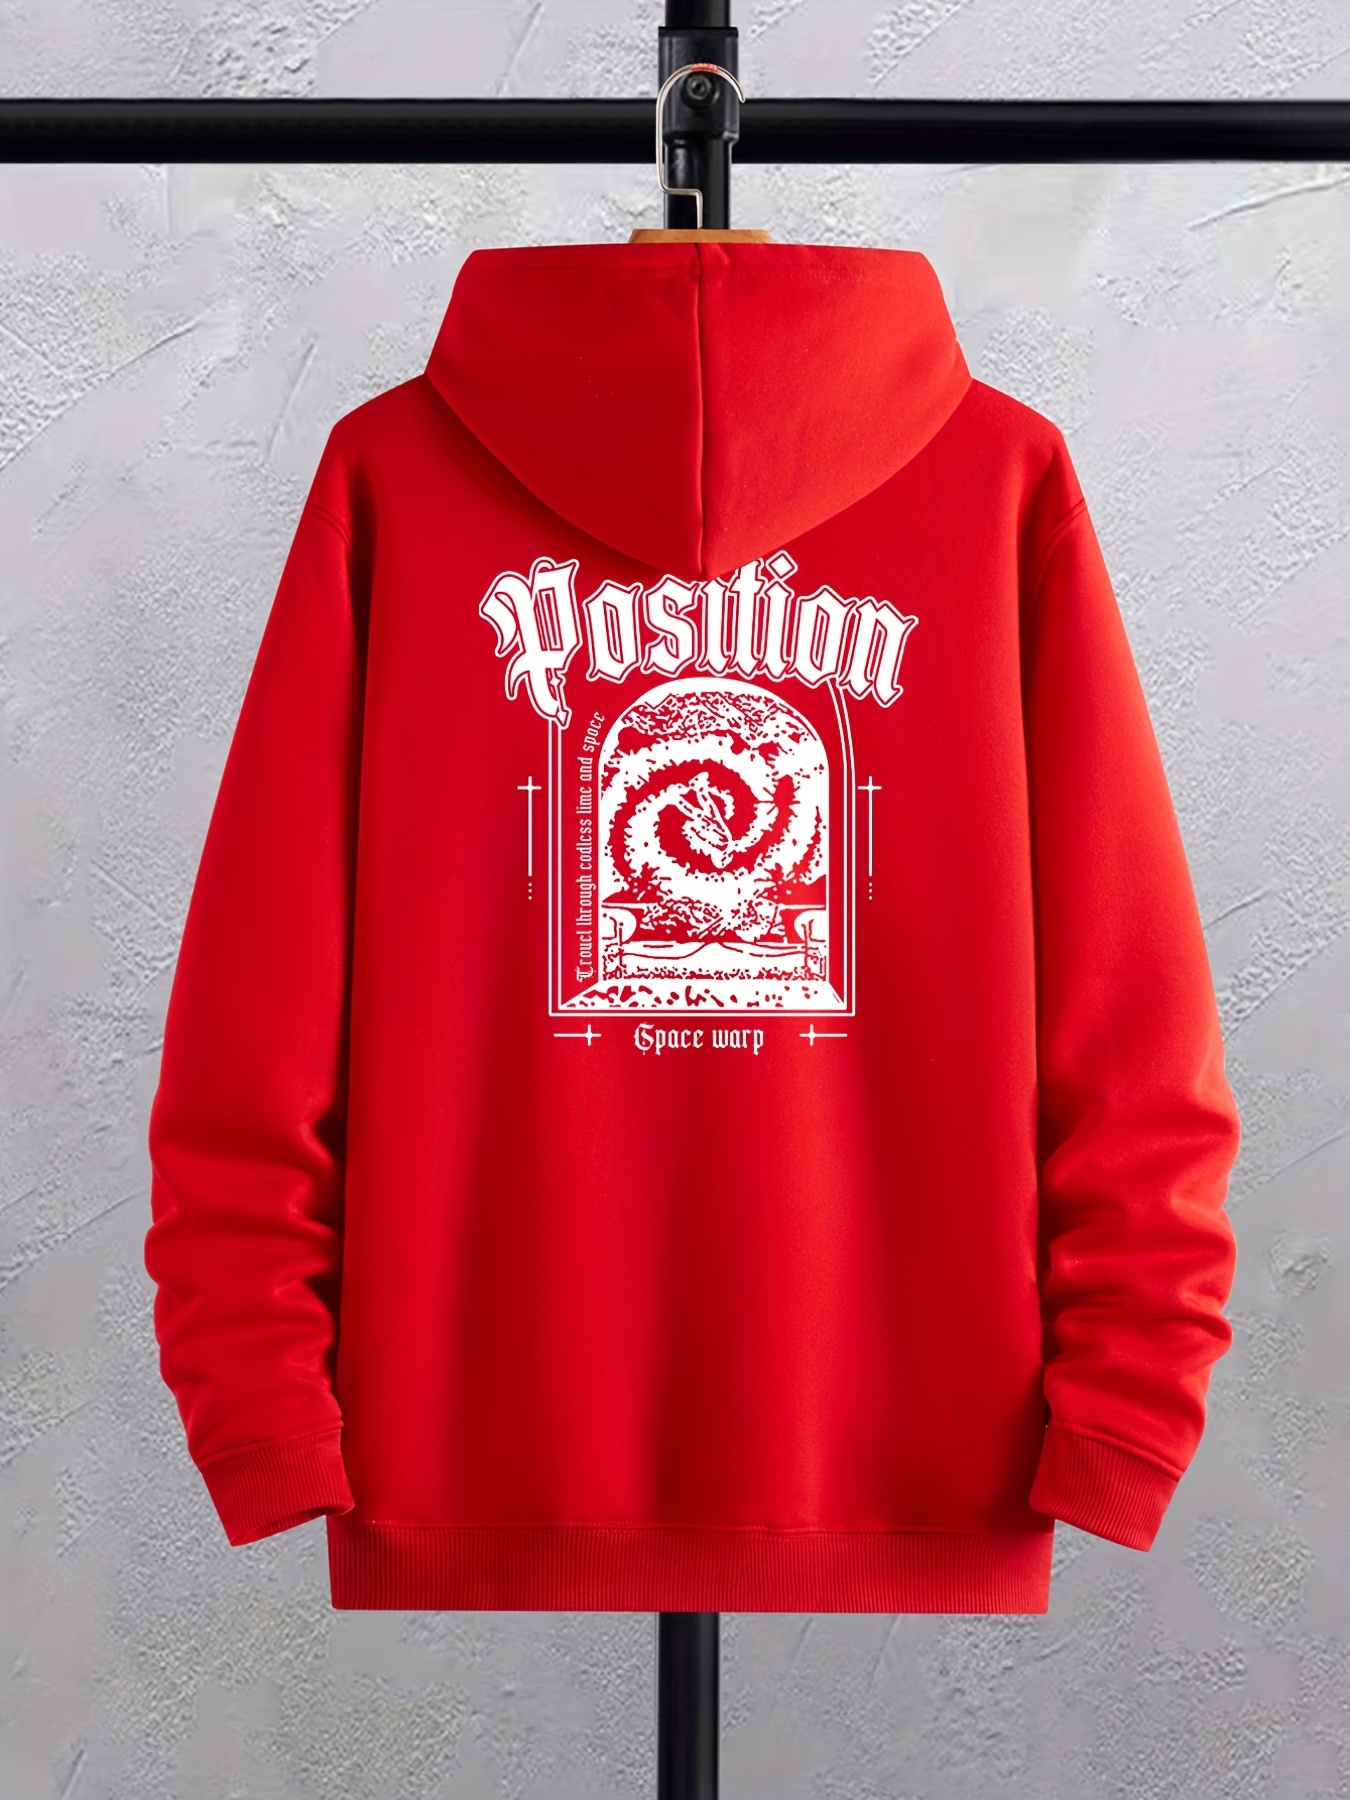 Position Men's Fleece Hoodie With Back Print, Comfy Stretch